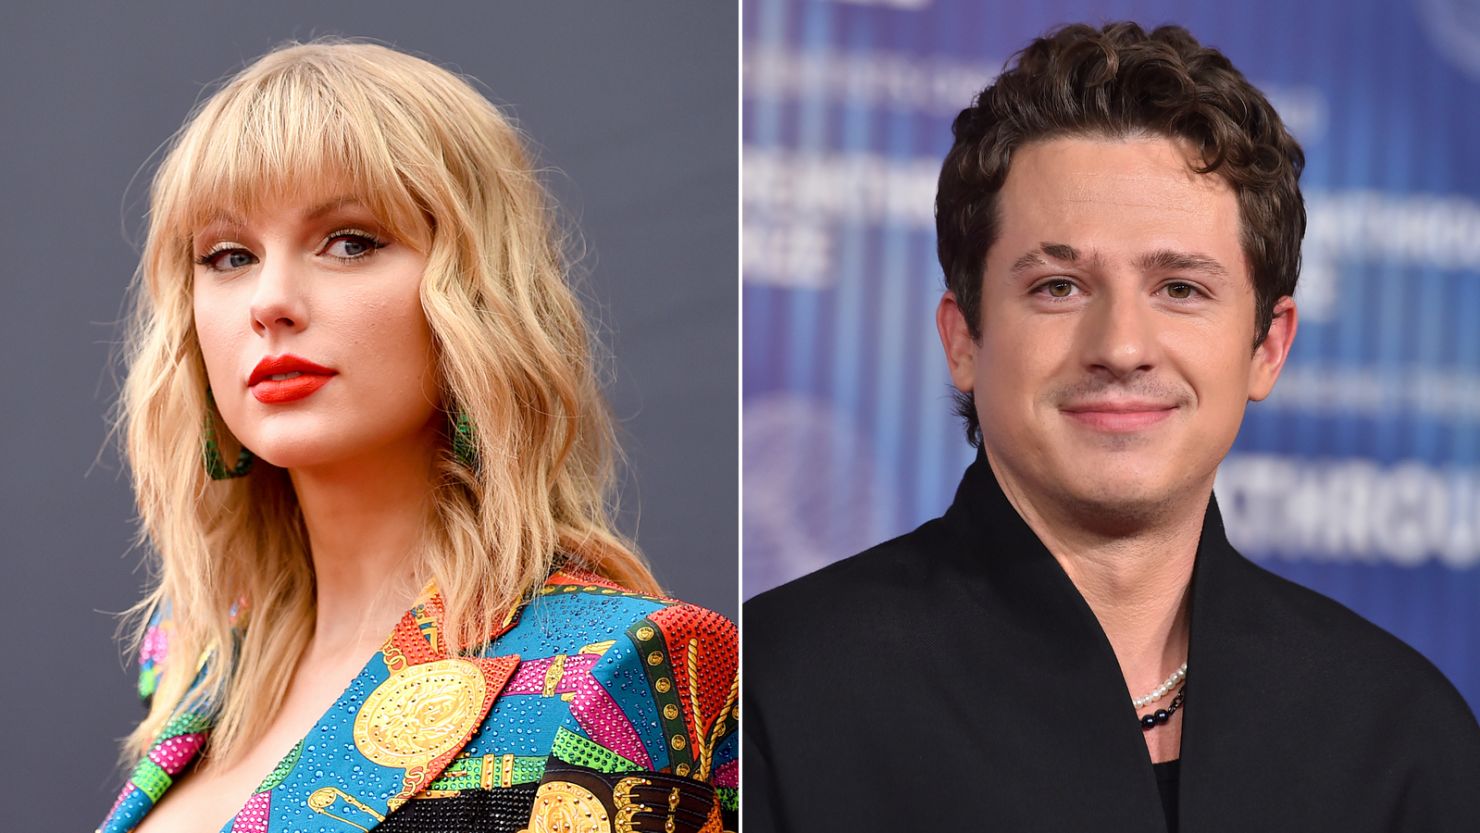 Taylor Swift and Charlie Puth.